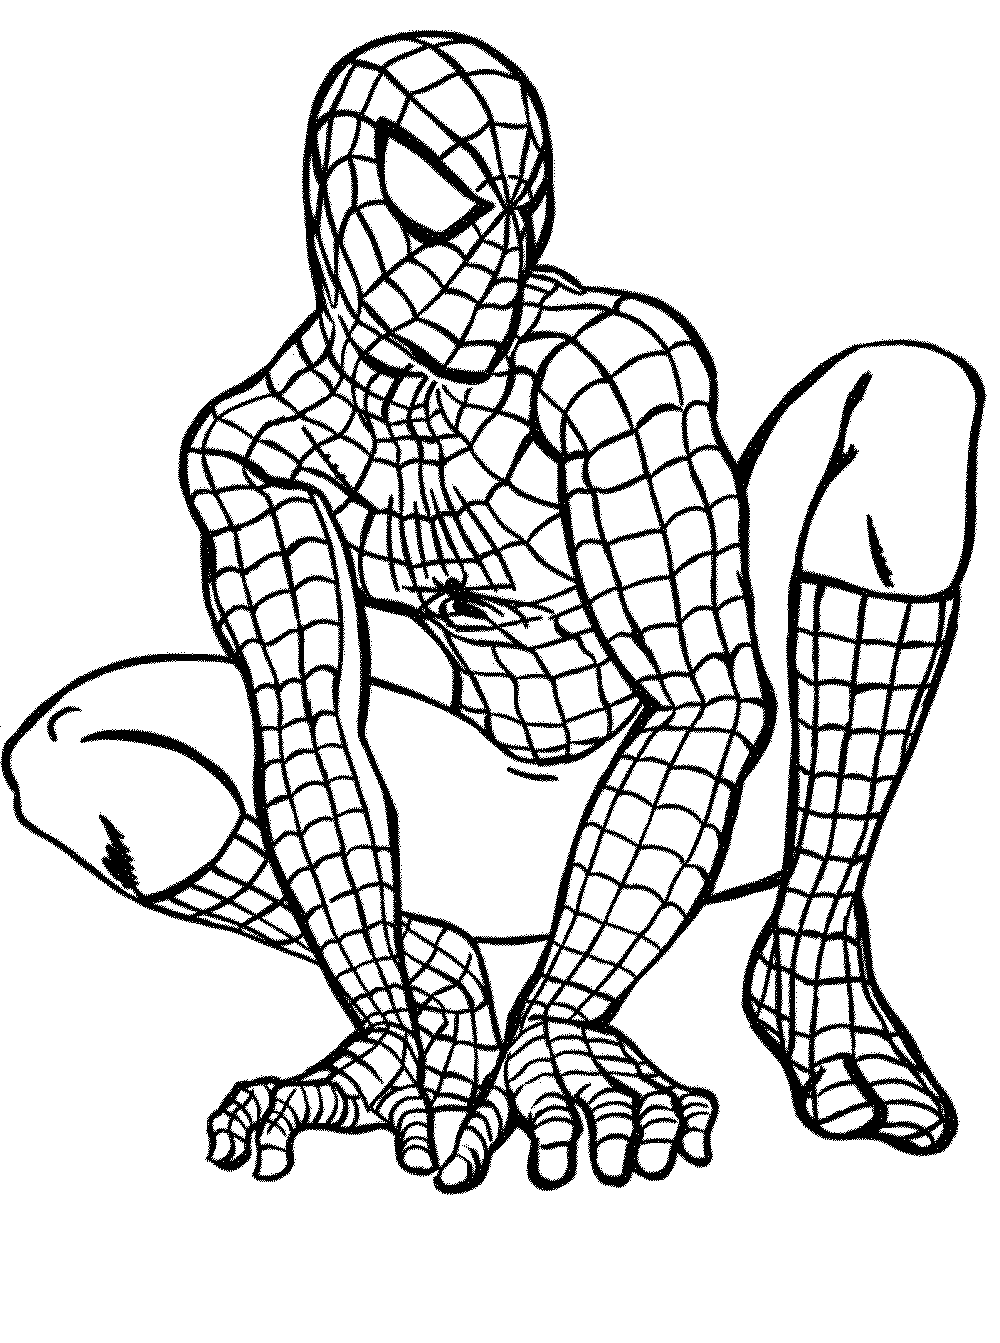 spiderman coloring pages download     BestAppsForKids.com